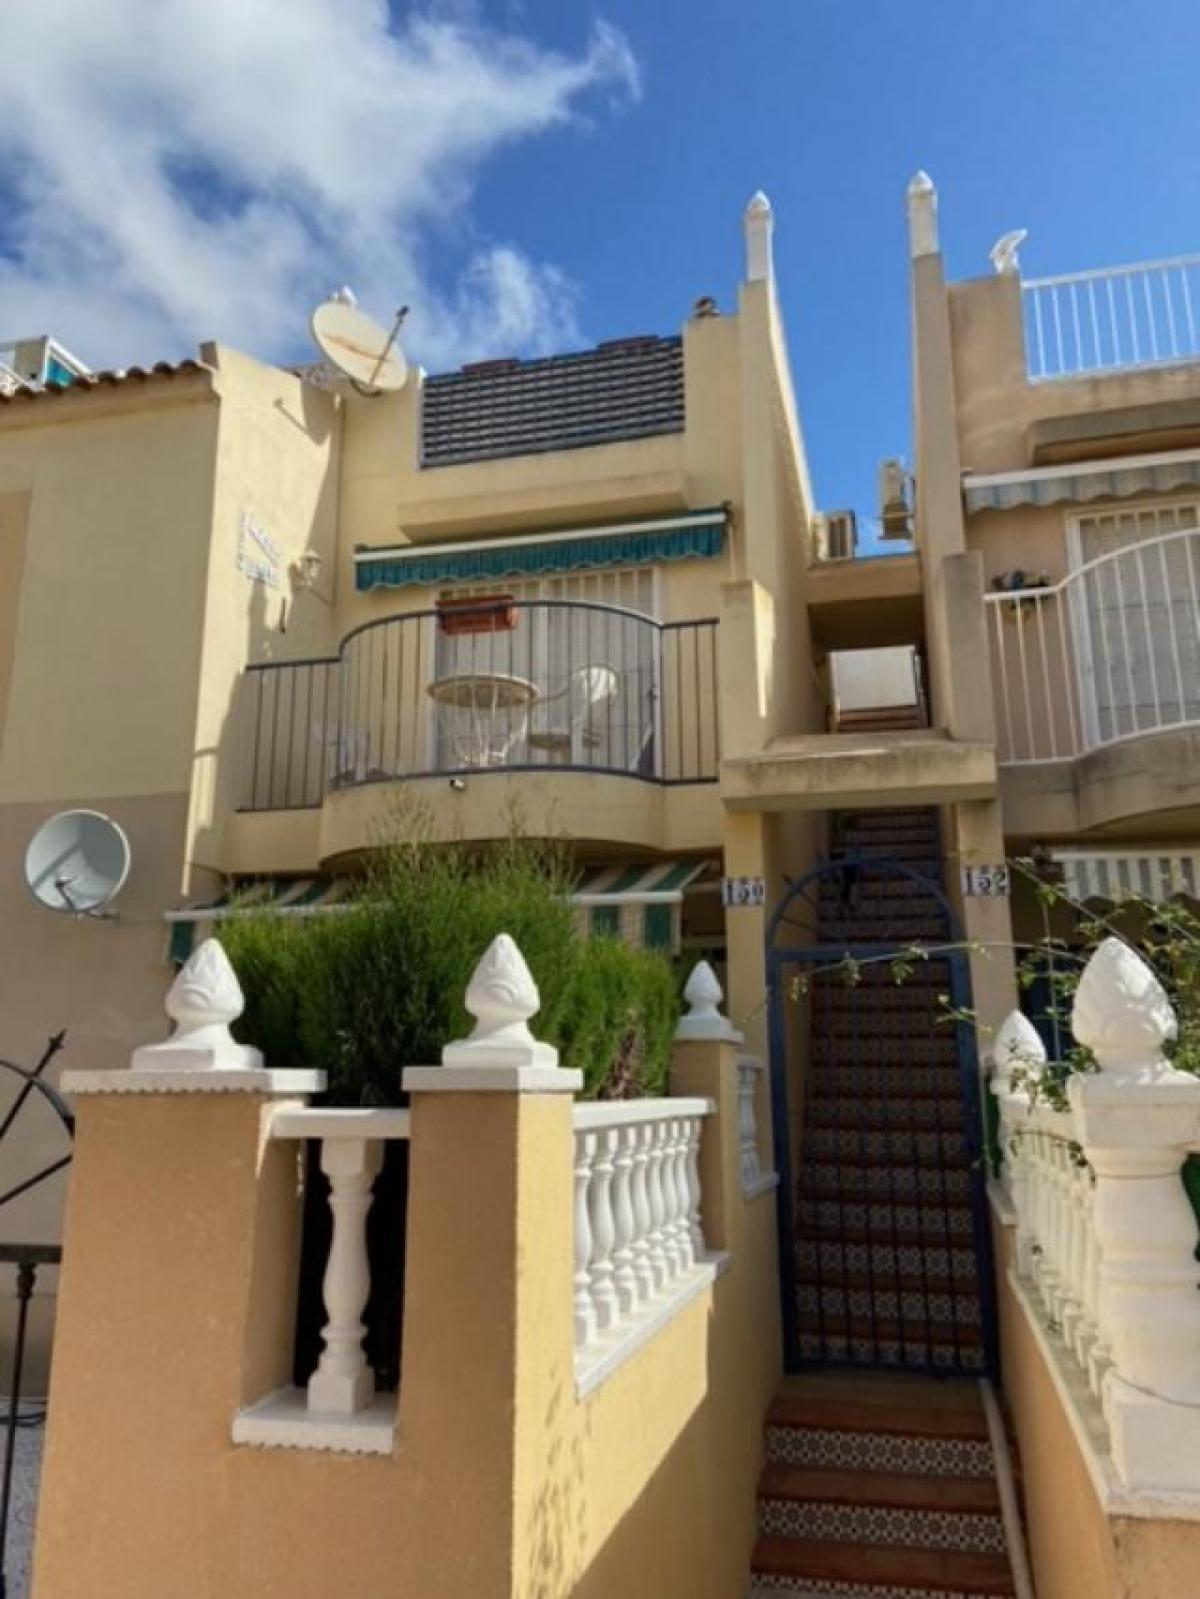 Picture of Bungalow For Sale in El Chaparral, Malaga, Spain